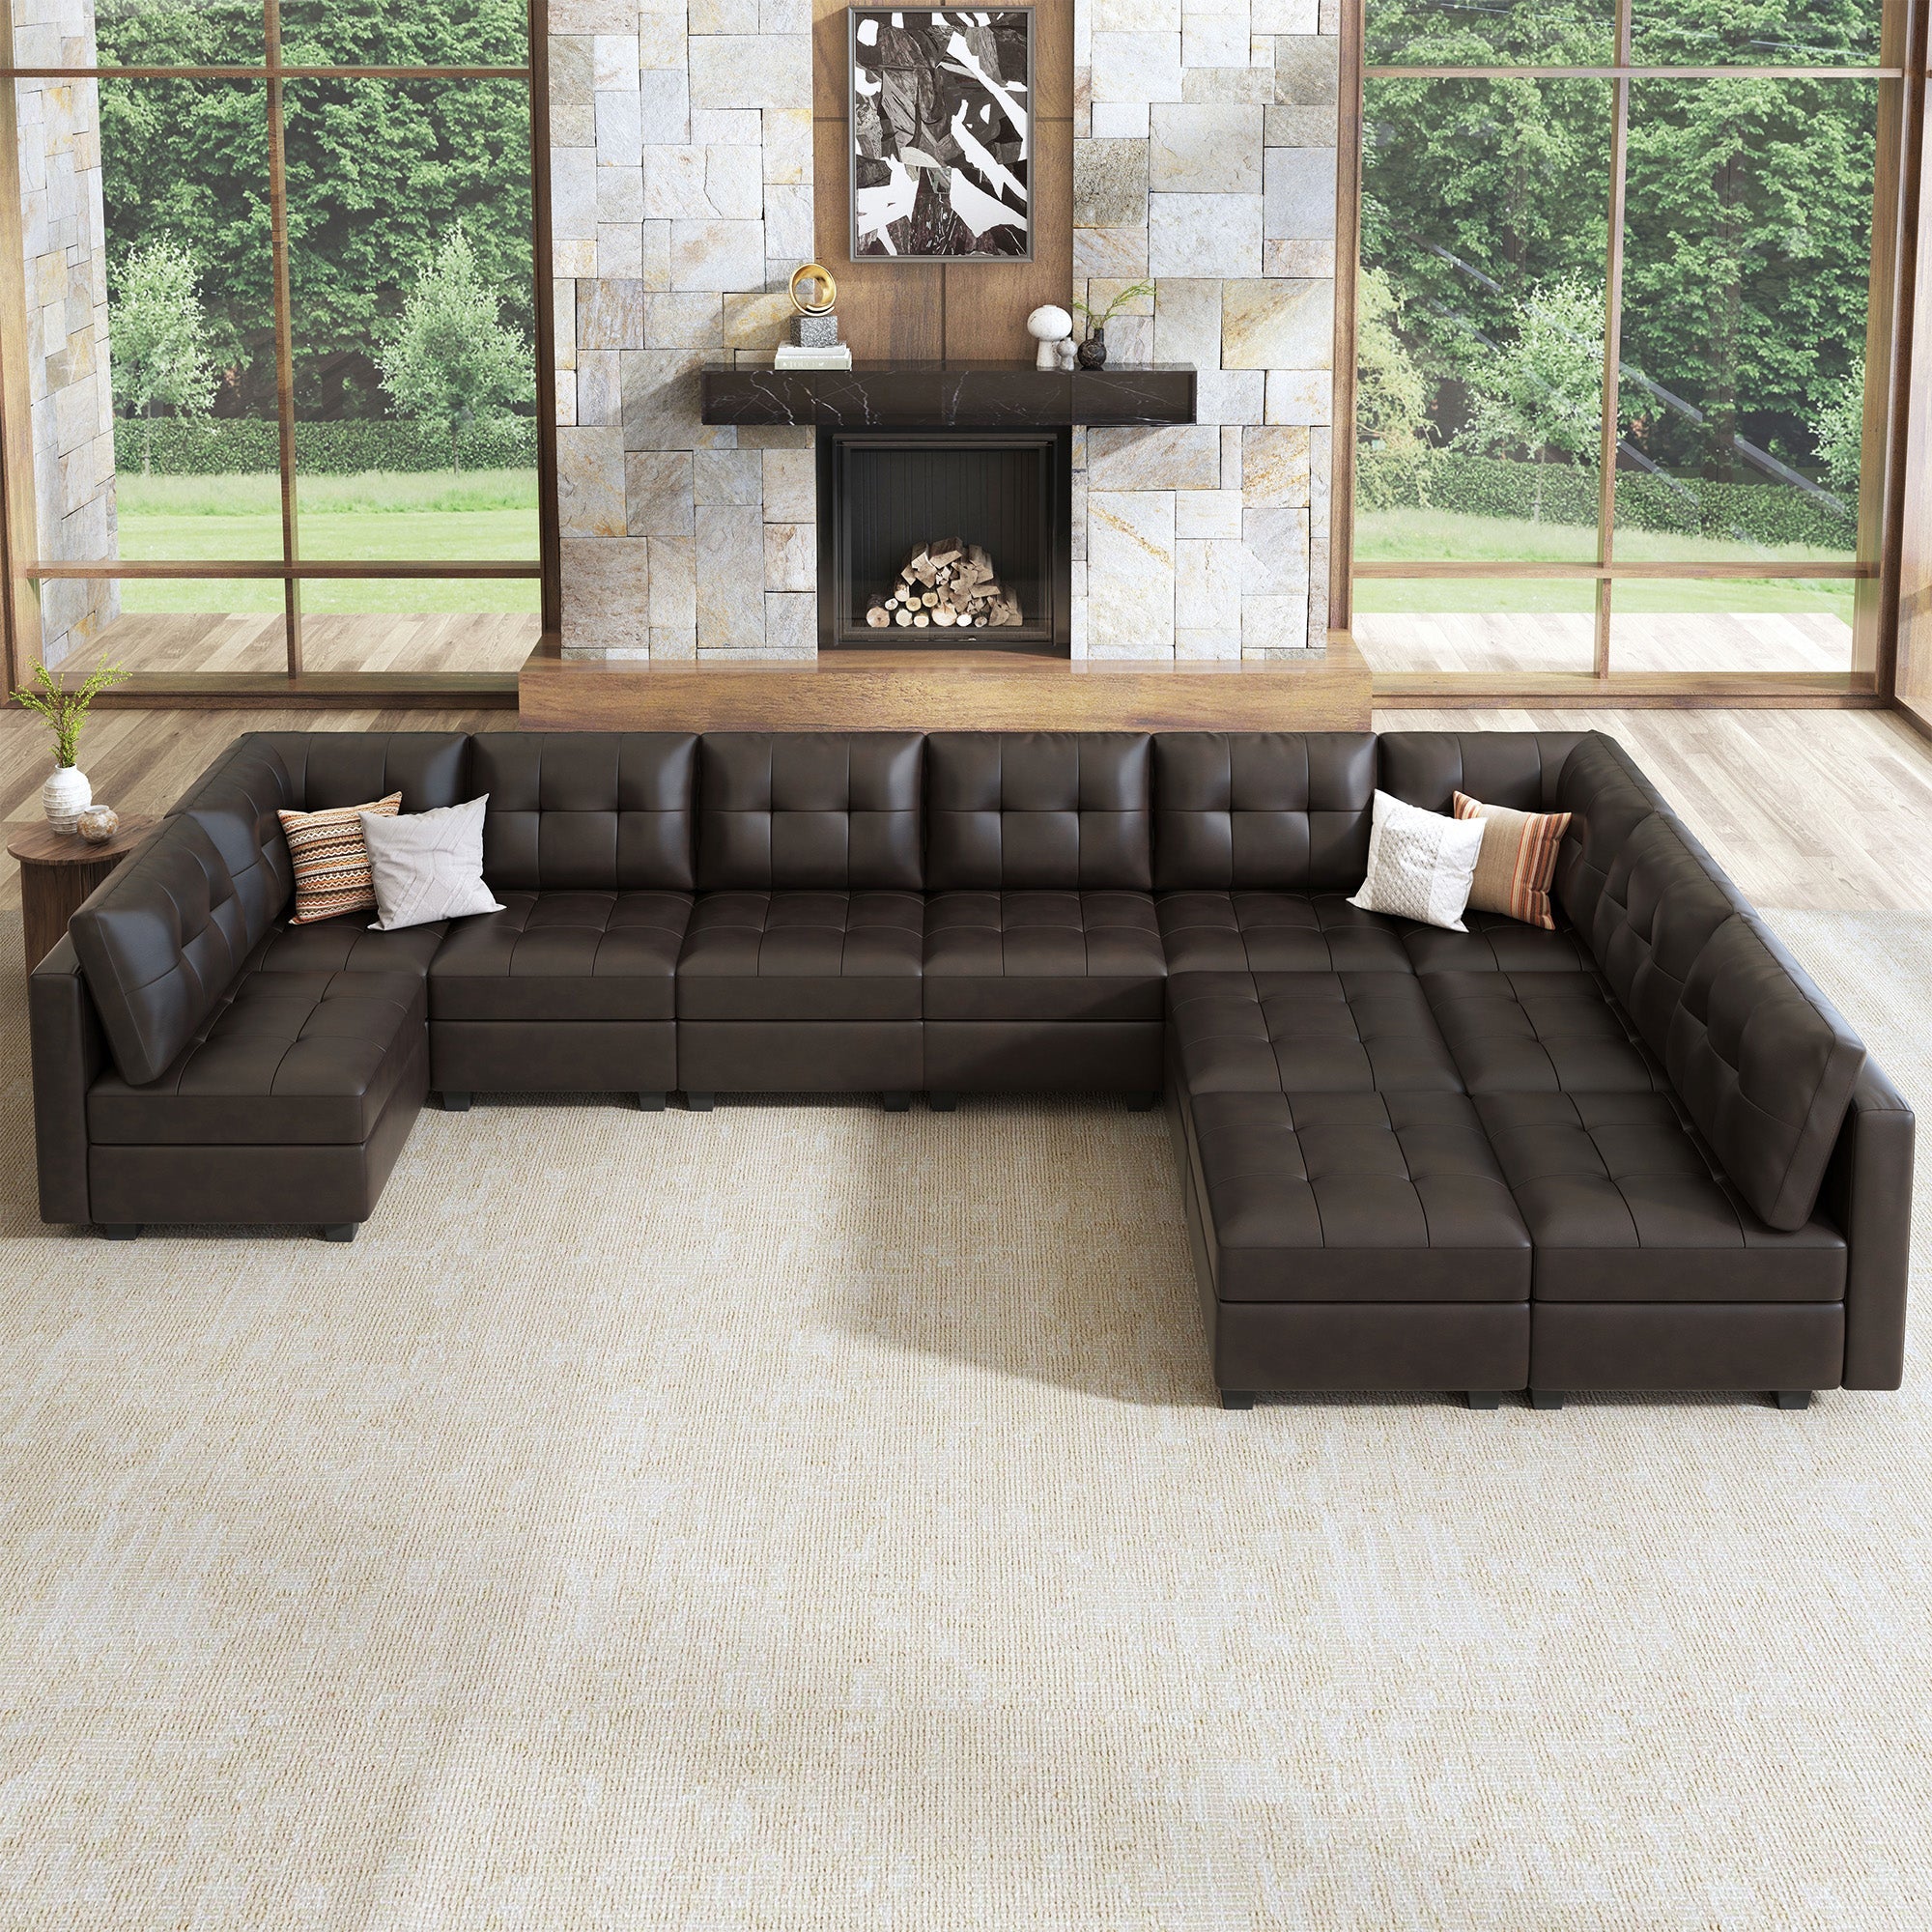 HONBAY 11-Piece Faux Leather Modular Sleeper Sectional With Storage Seat